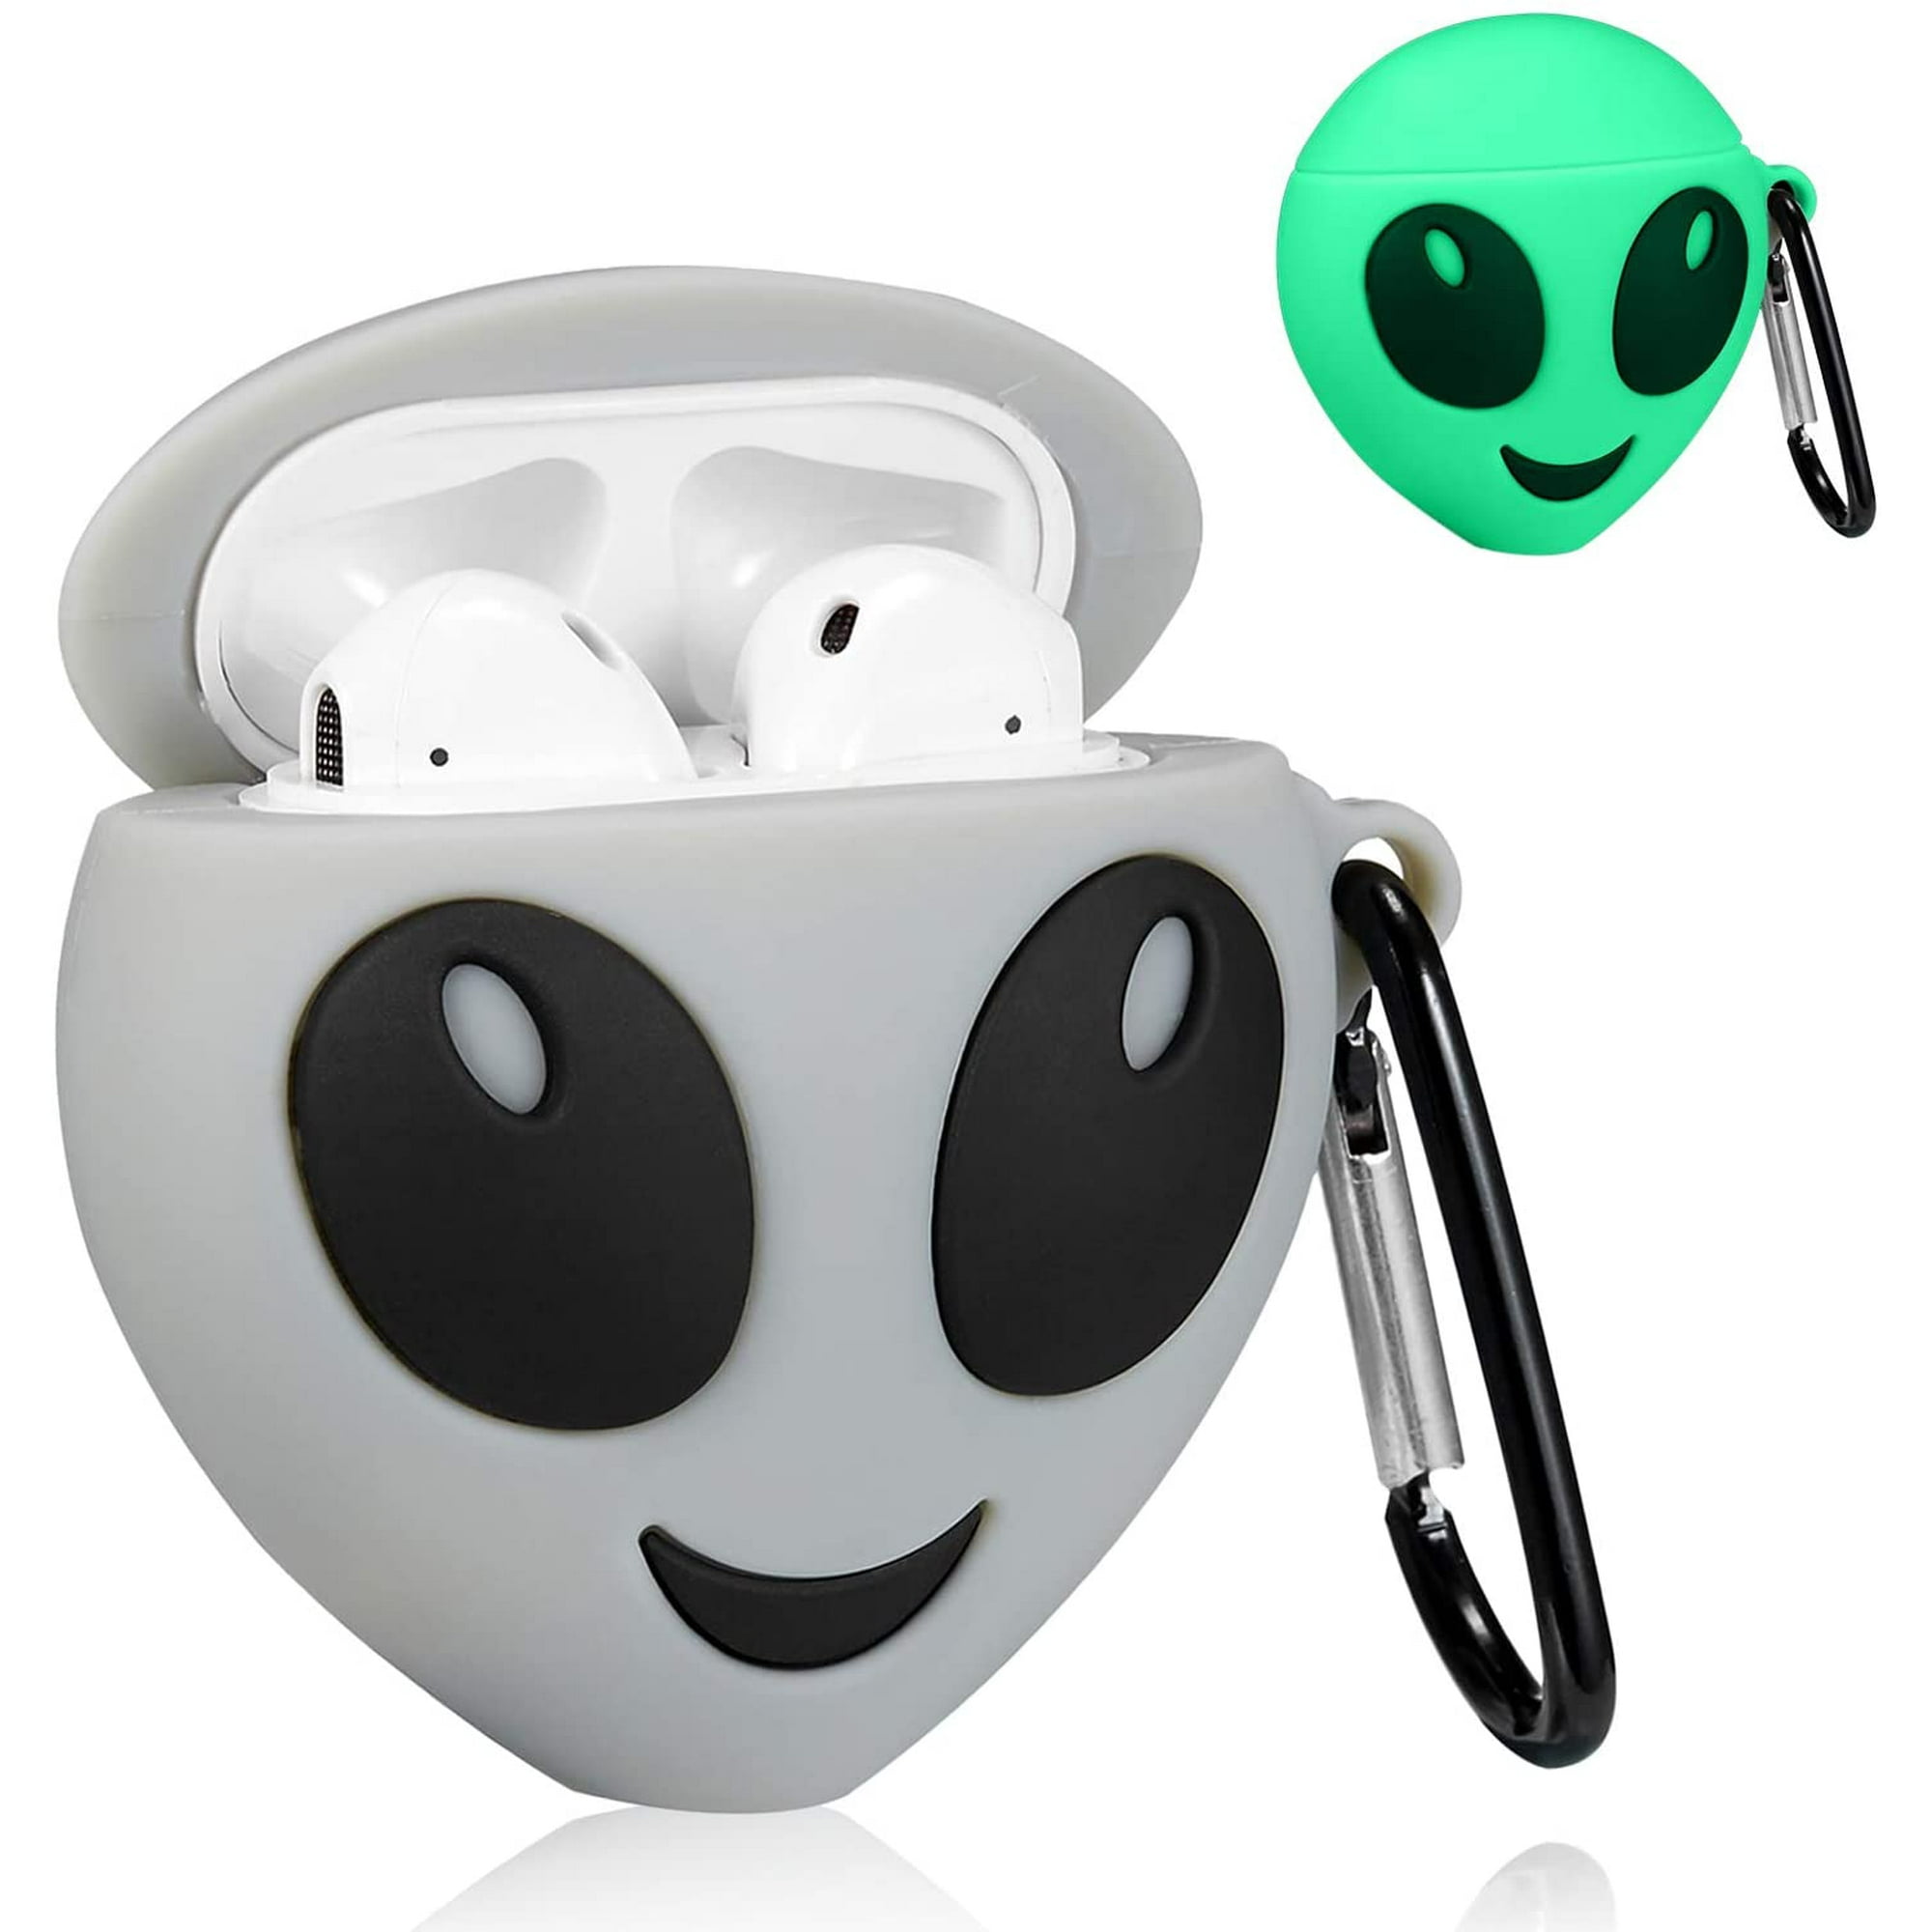 Airpod Case for Apple Airpods 1&2, Cute 3D Funny Cartoon Soft Silicone  Cover, Kawaii Fun Cool Keycha…See more Airpod Case for Apple Airpods 1&2,  Cute